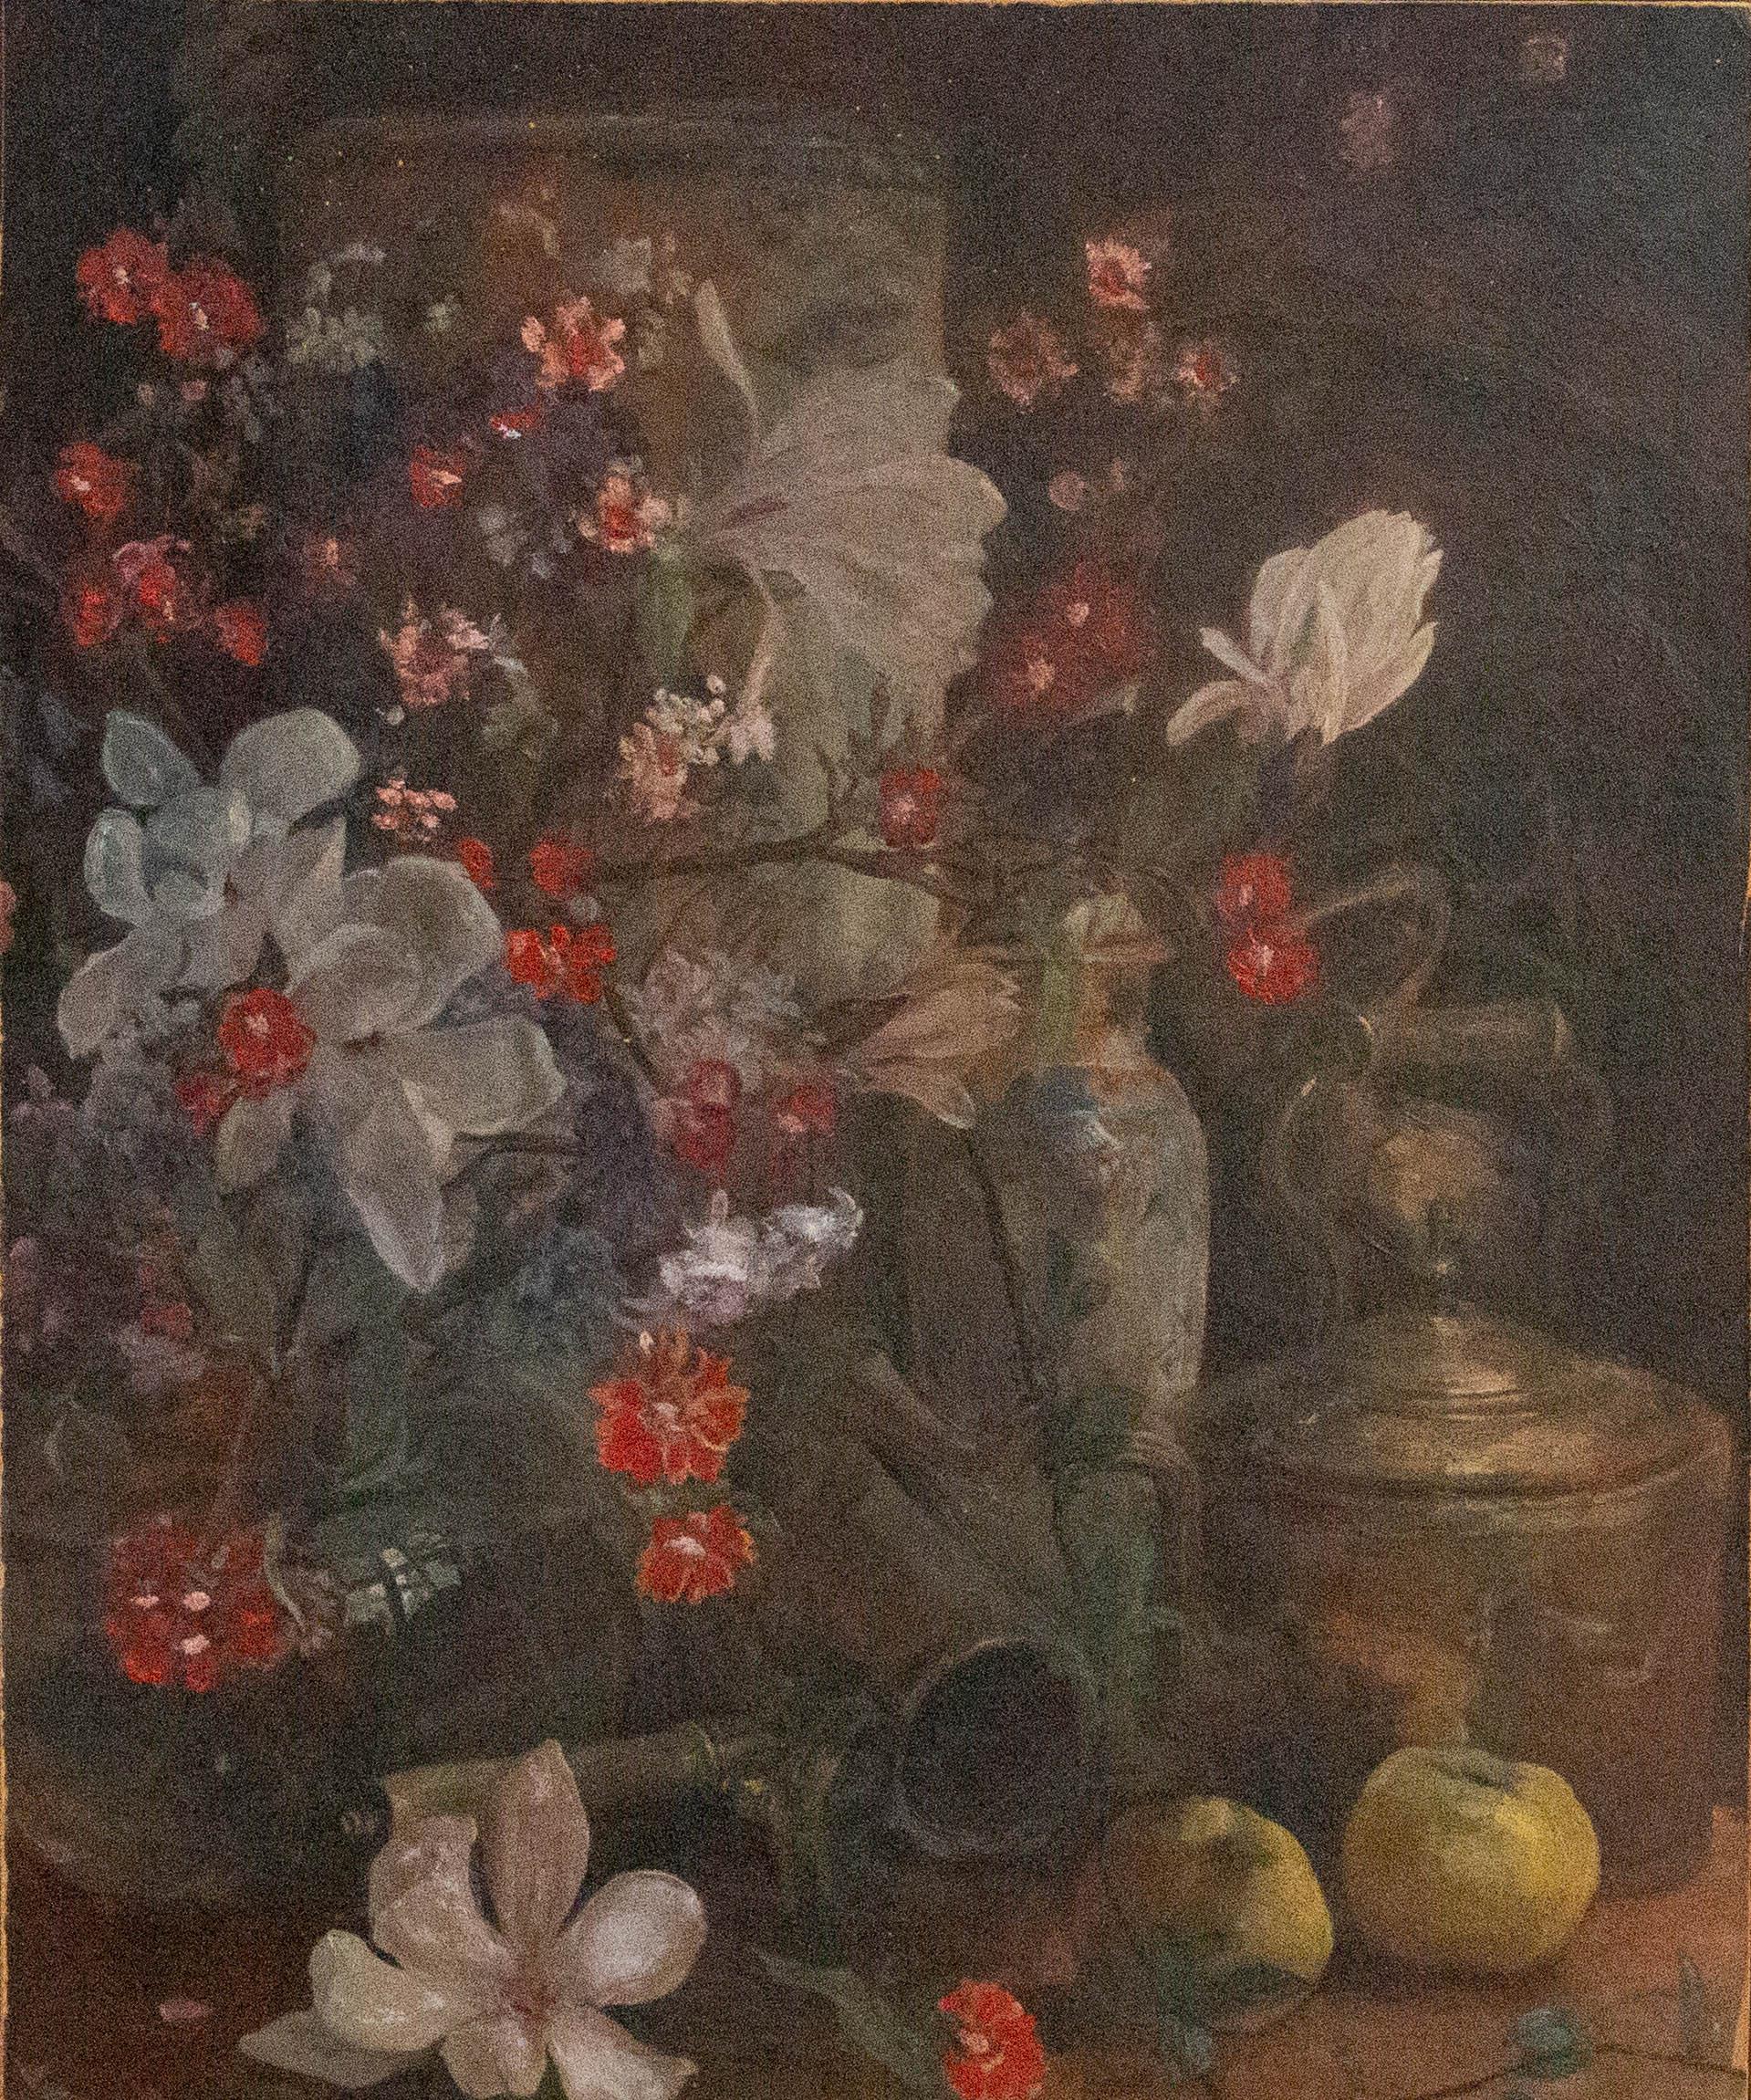 Early 20th Century Oil - Magnolia With Apples - Black Still-Life Painting by Unknown